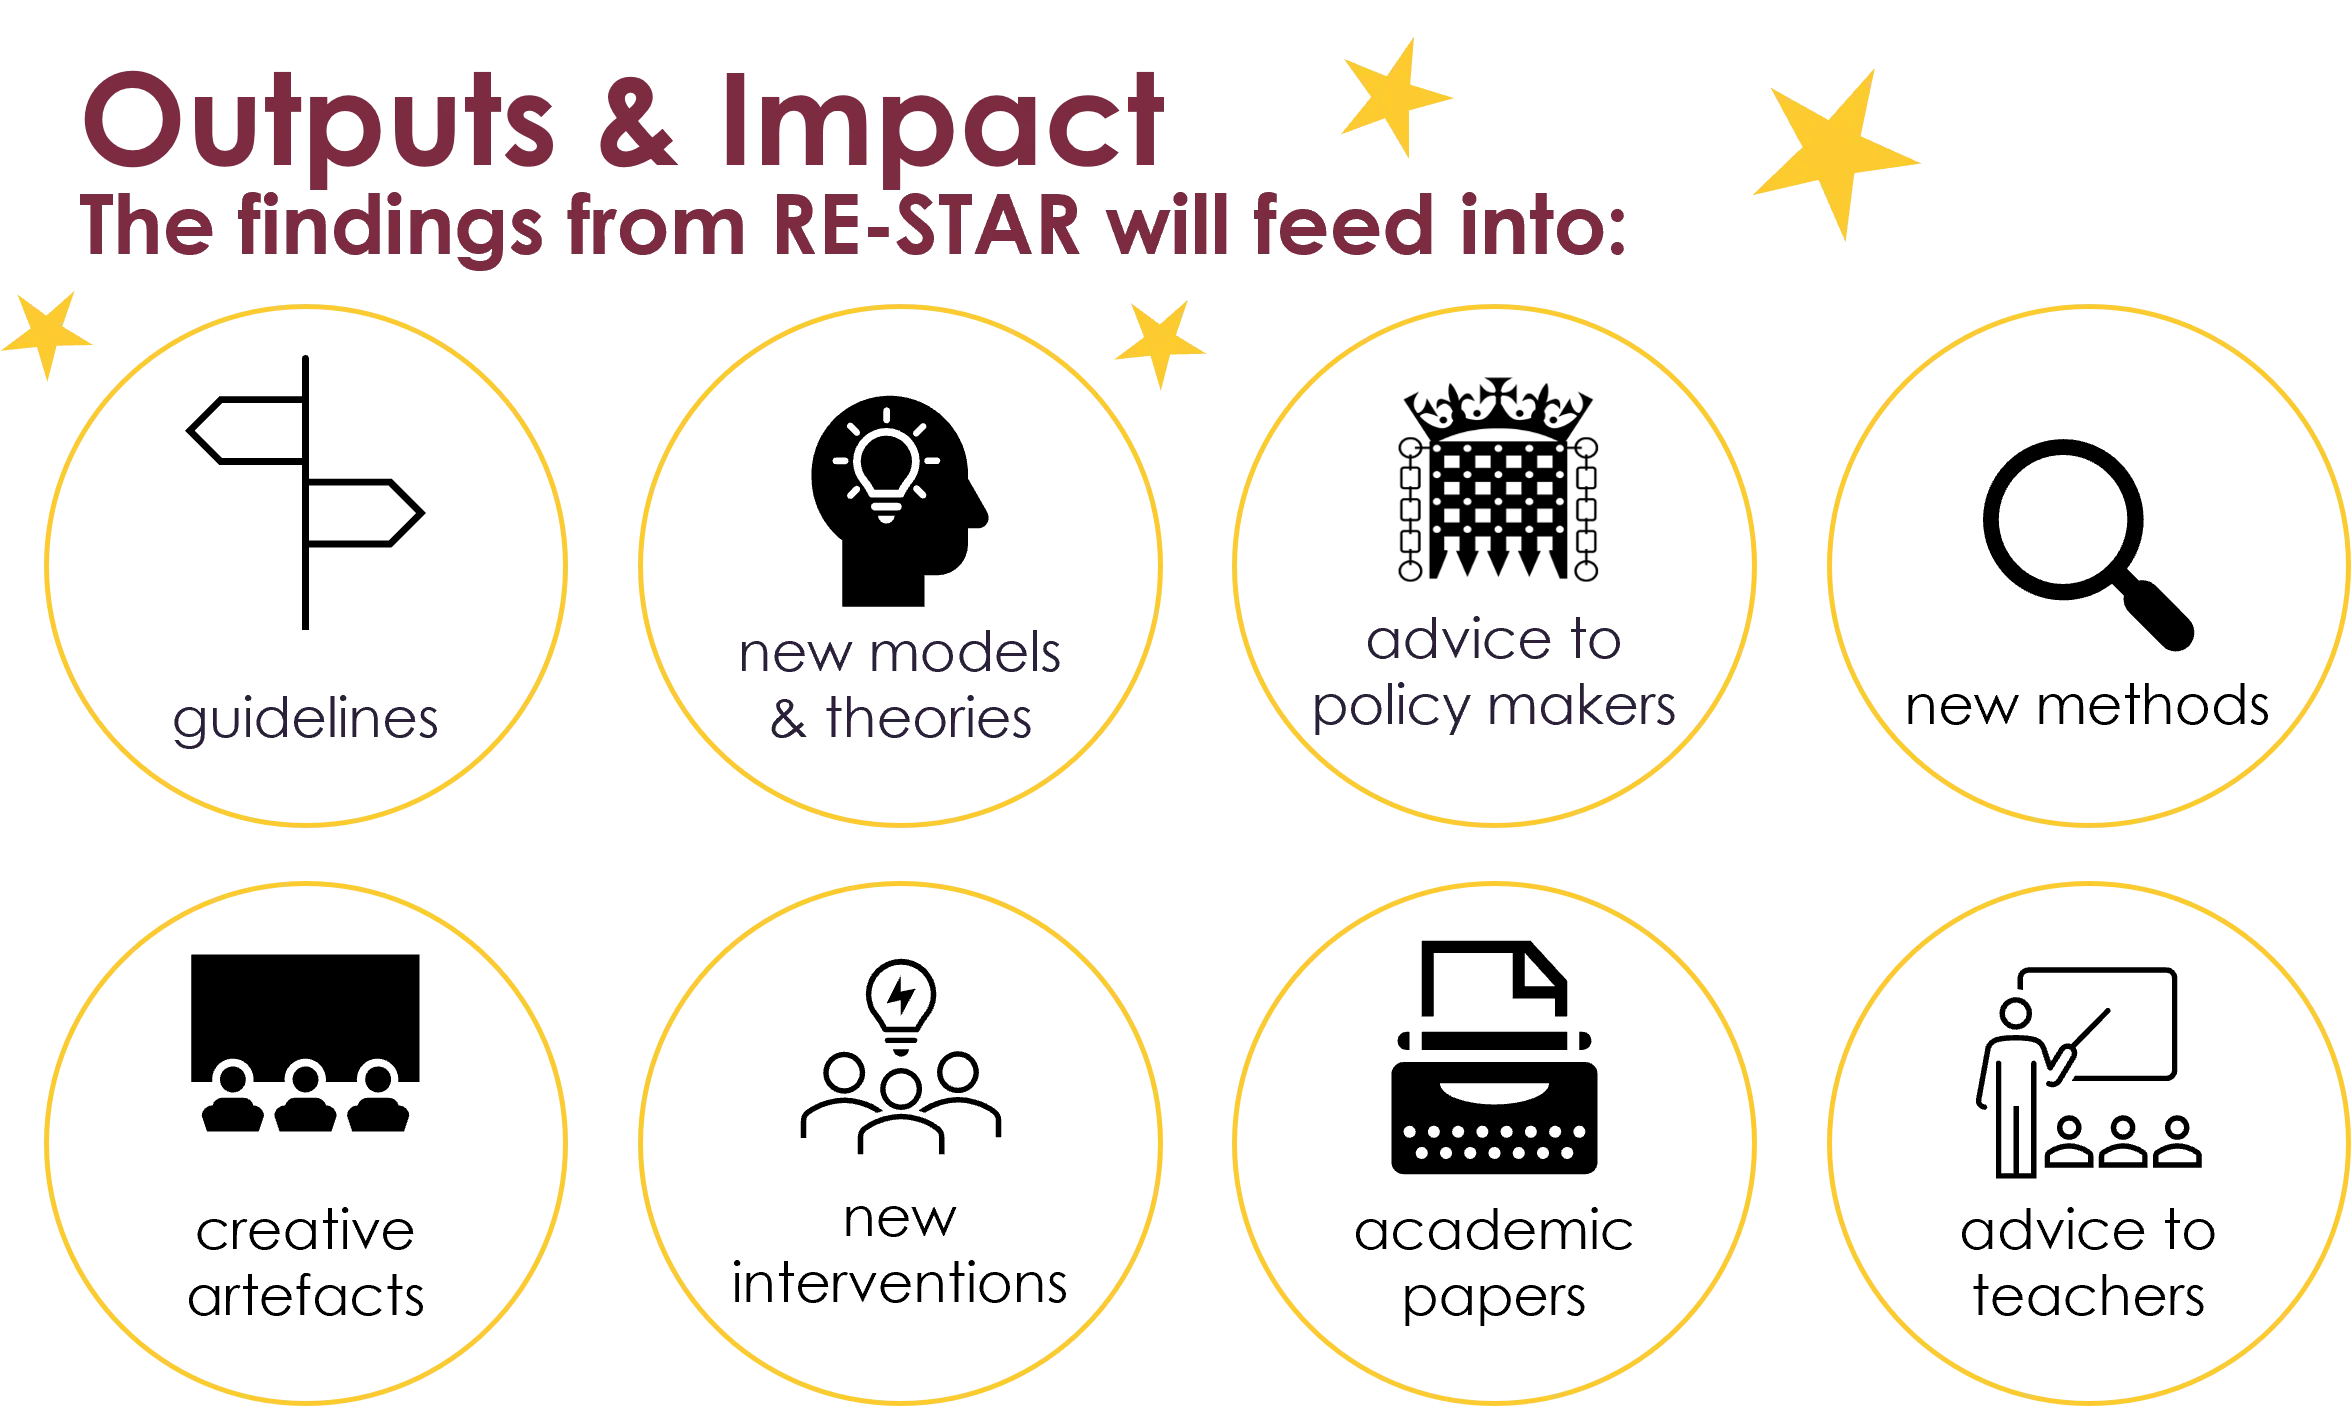 RE-STAR outputs and impact: guidelines, new theories & models, advice to policy makers, new methods, creative artefacts, new interventions, academic papers and advice to teachers